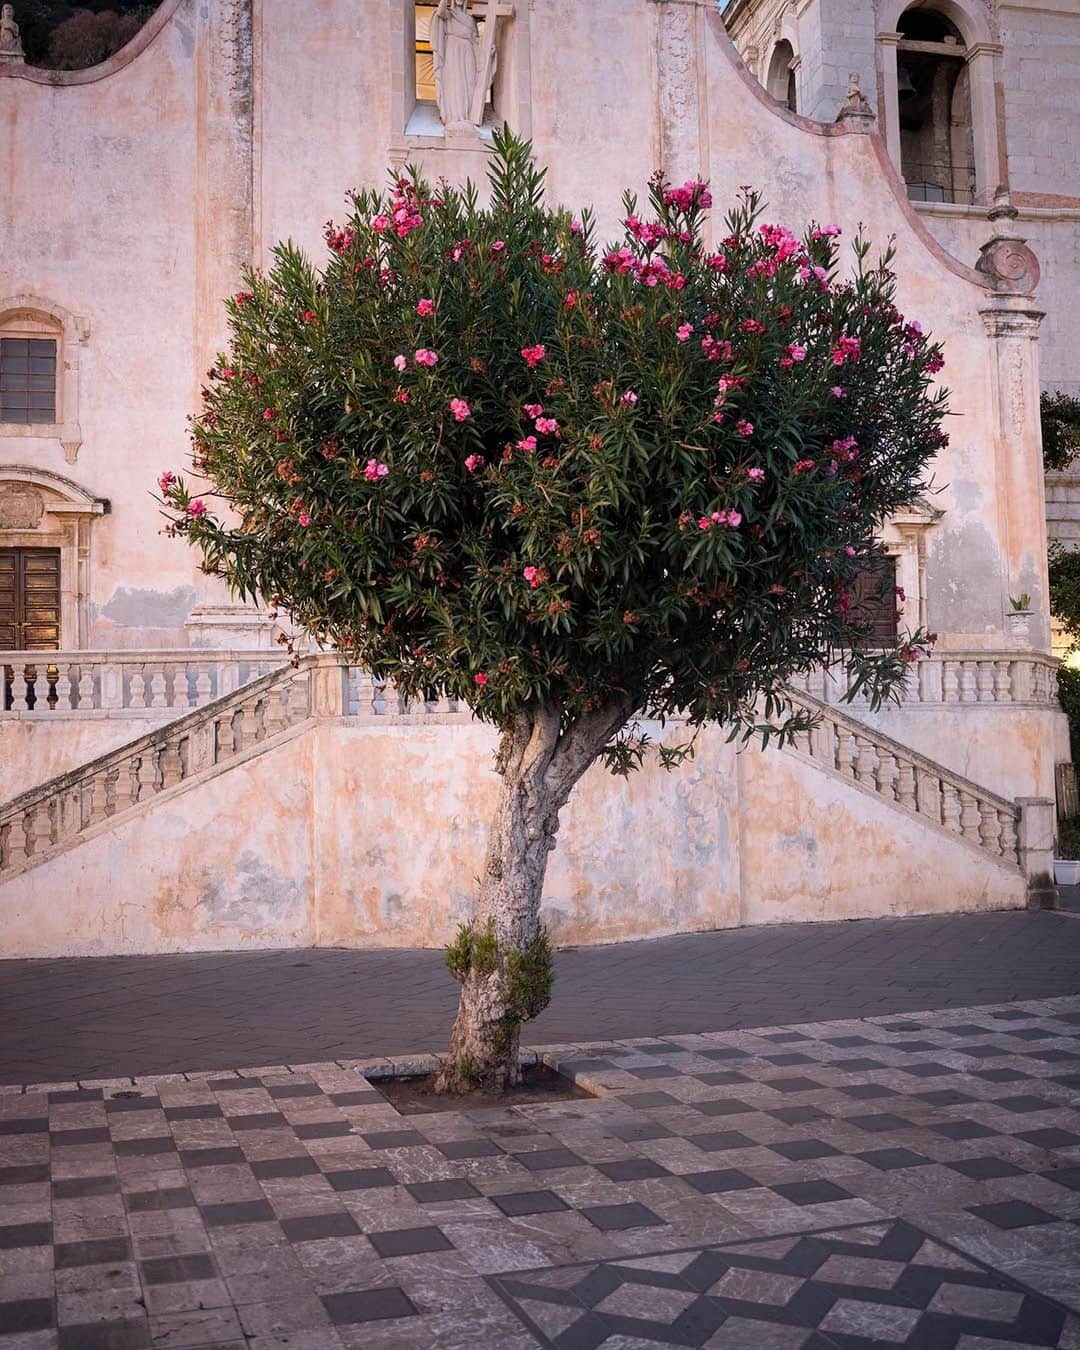 Magnum Photosのインスタグラム：「In partnership with @belmond, a new show, Sicily As Seen By @gregoryhalpern, opens at the Magnum Gallery in Paris from October 19-21 🌺⁠ ⁠ To celebrate the 150th anniversary of the @belmondgrandhoteltimeo in Taormina, Sicily, Belmond commissioned Halpern to travel around Sicily with Daniel Heyden, Belmond's Editorial Director, and capture the beauty and vibrancy of the island's landscape, history and culture.⁠ ⁠ “The pictures reveal my fascination with light, color, flora, and the feeling of the place as a complicated, raw and beautiful land,” says Halpern. ⁠ ⁠ A selection of 20 photographs from Halpern's journey with Belmond will be on show. ⁠ ⁠ 🔗 For gallery opening times, tap the link in the @magnumphotos bio. ⁠ ⁠ © @gregoryhalpern / Magnum Photos」